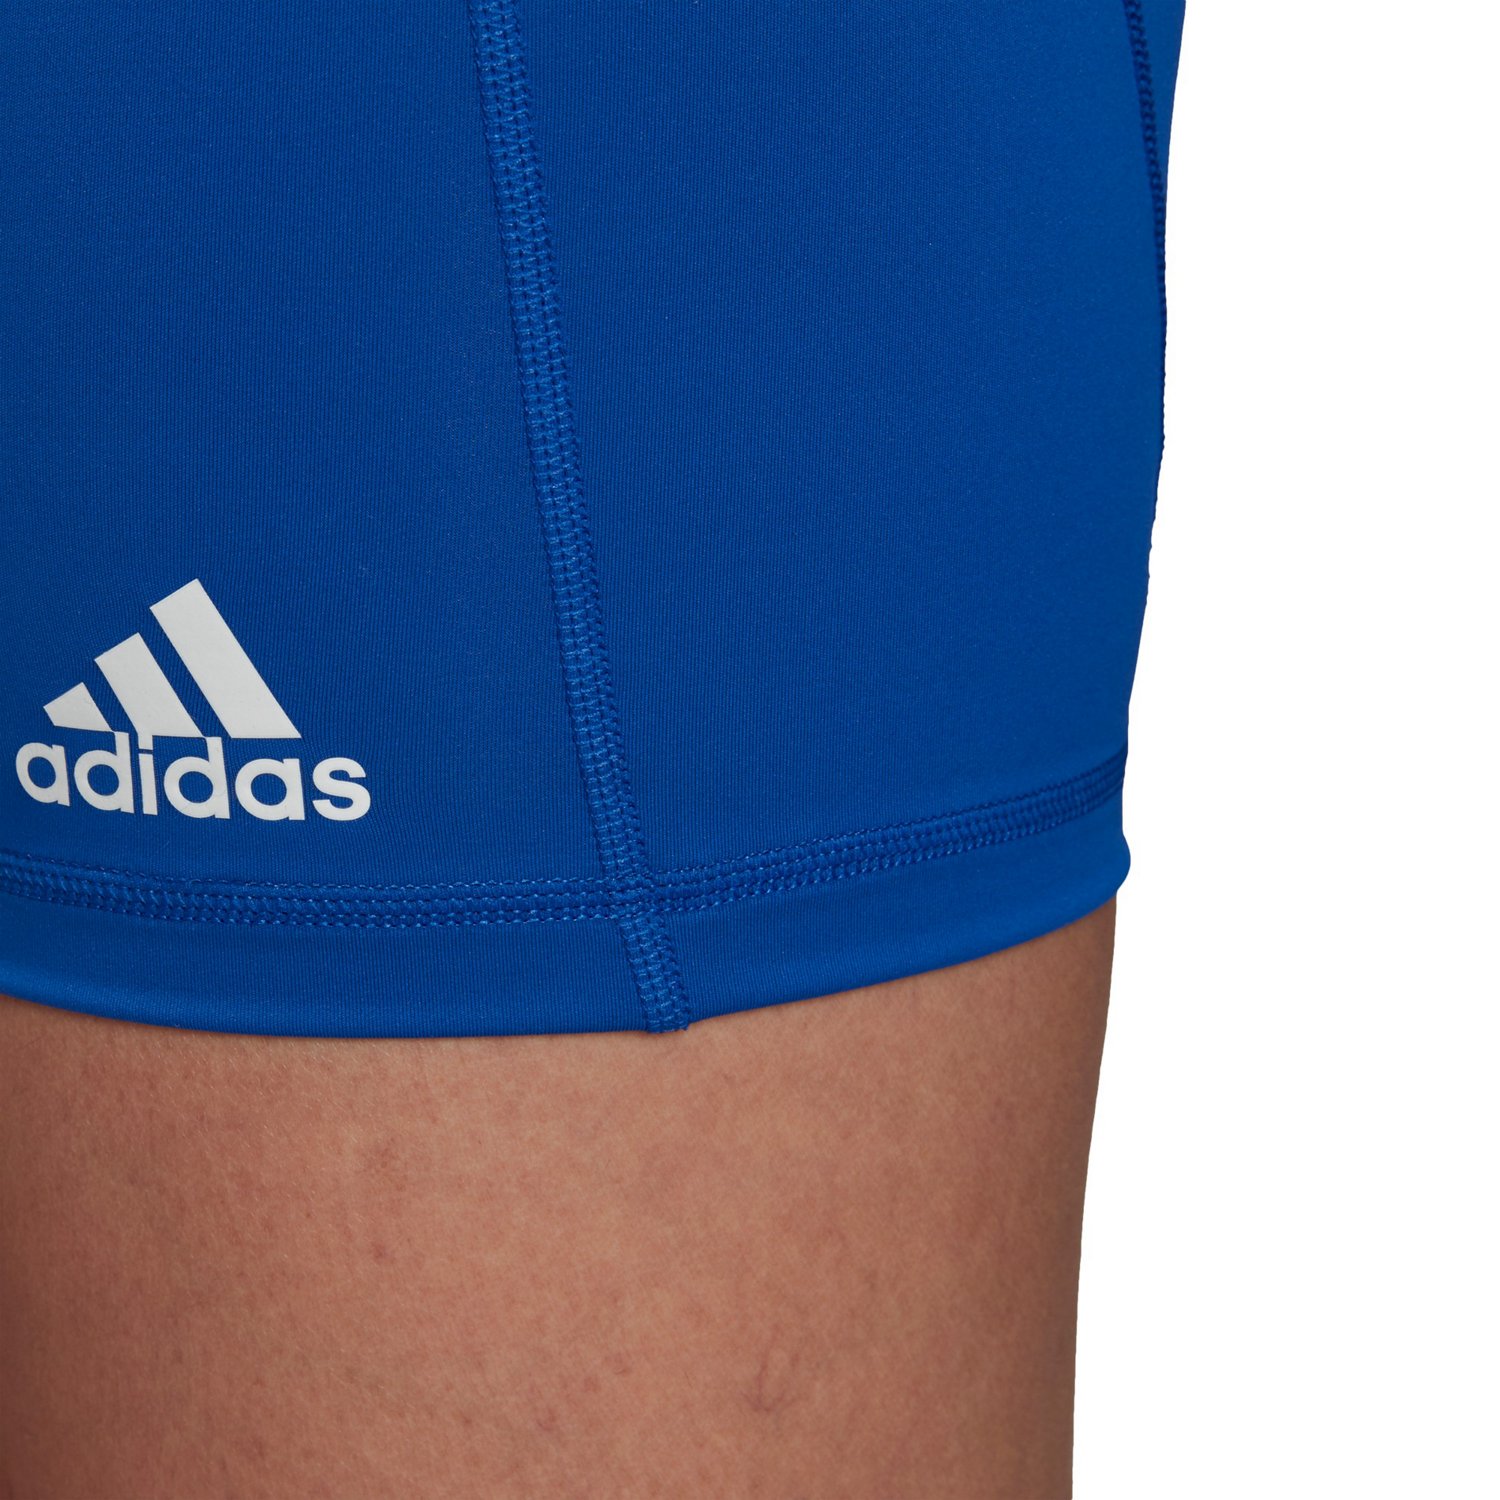 adidas Women’s TechFit Volleyball Shorts 3 in | Academy